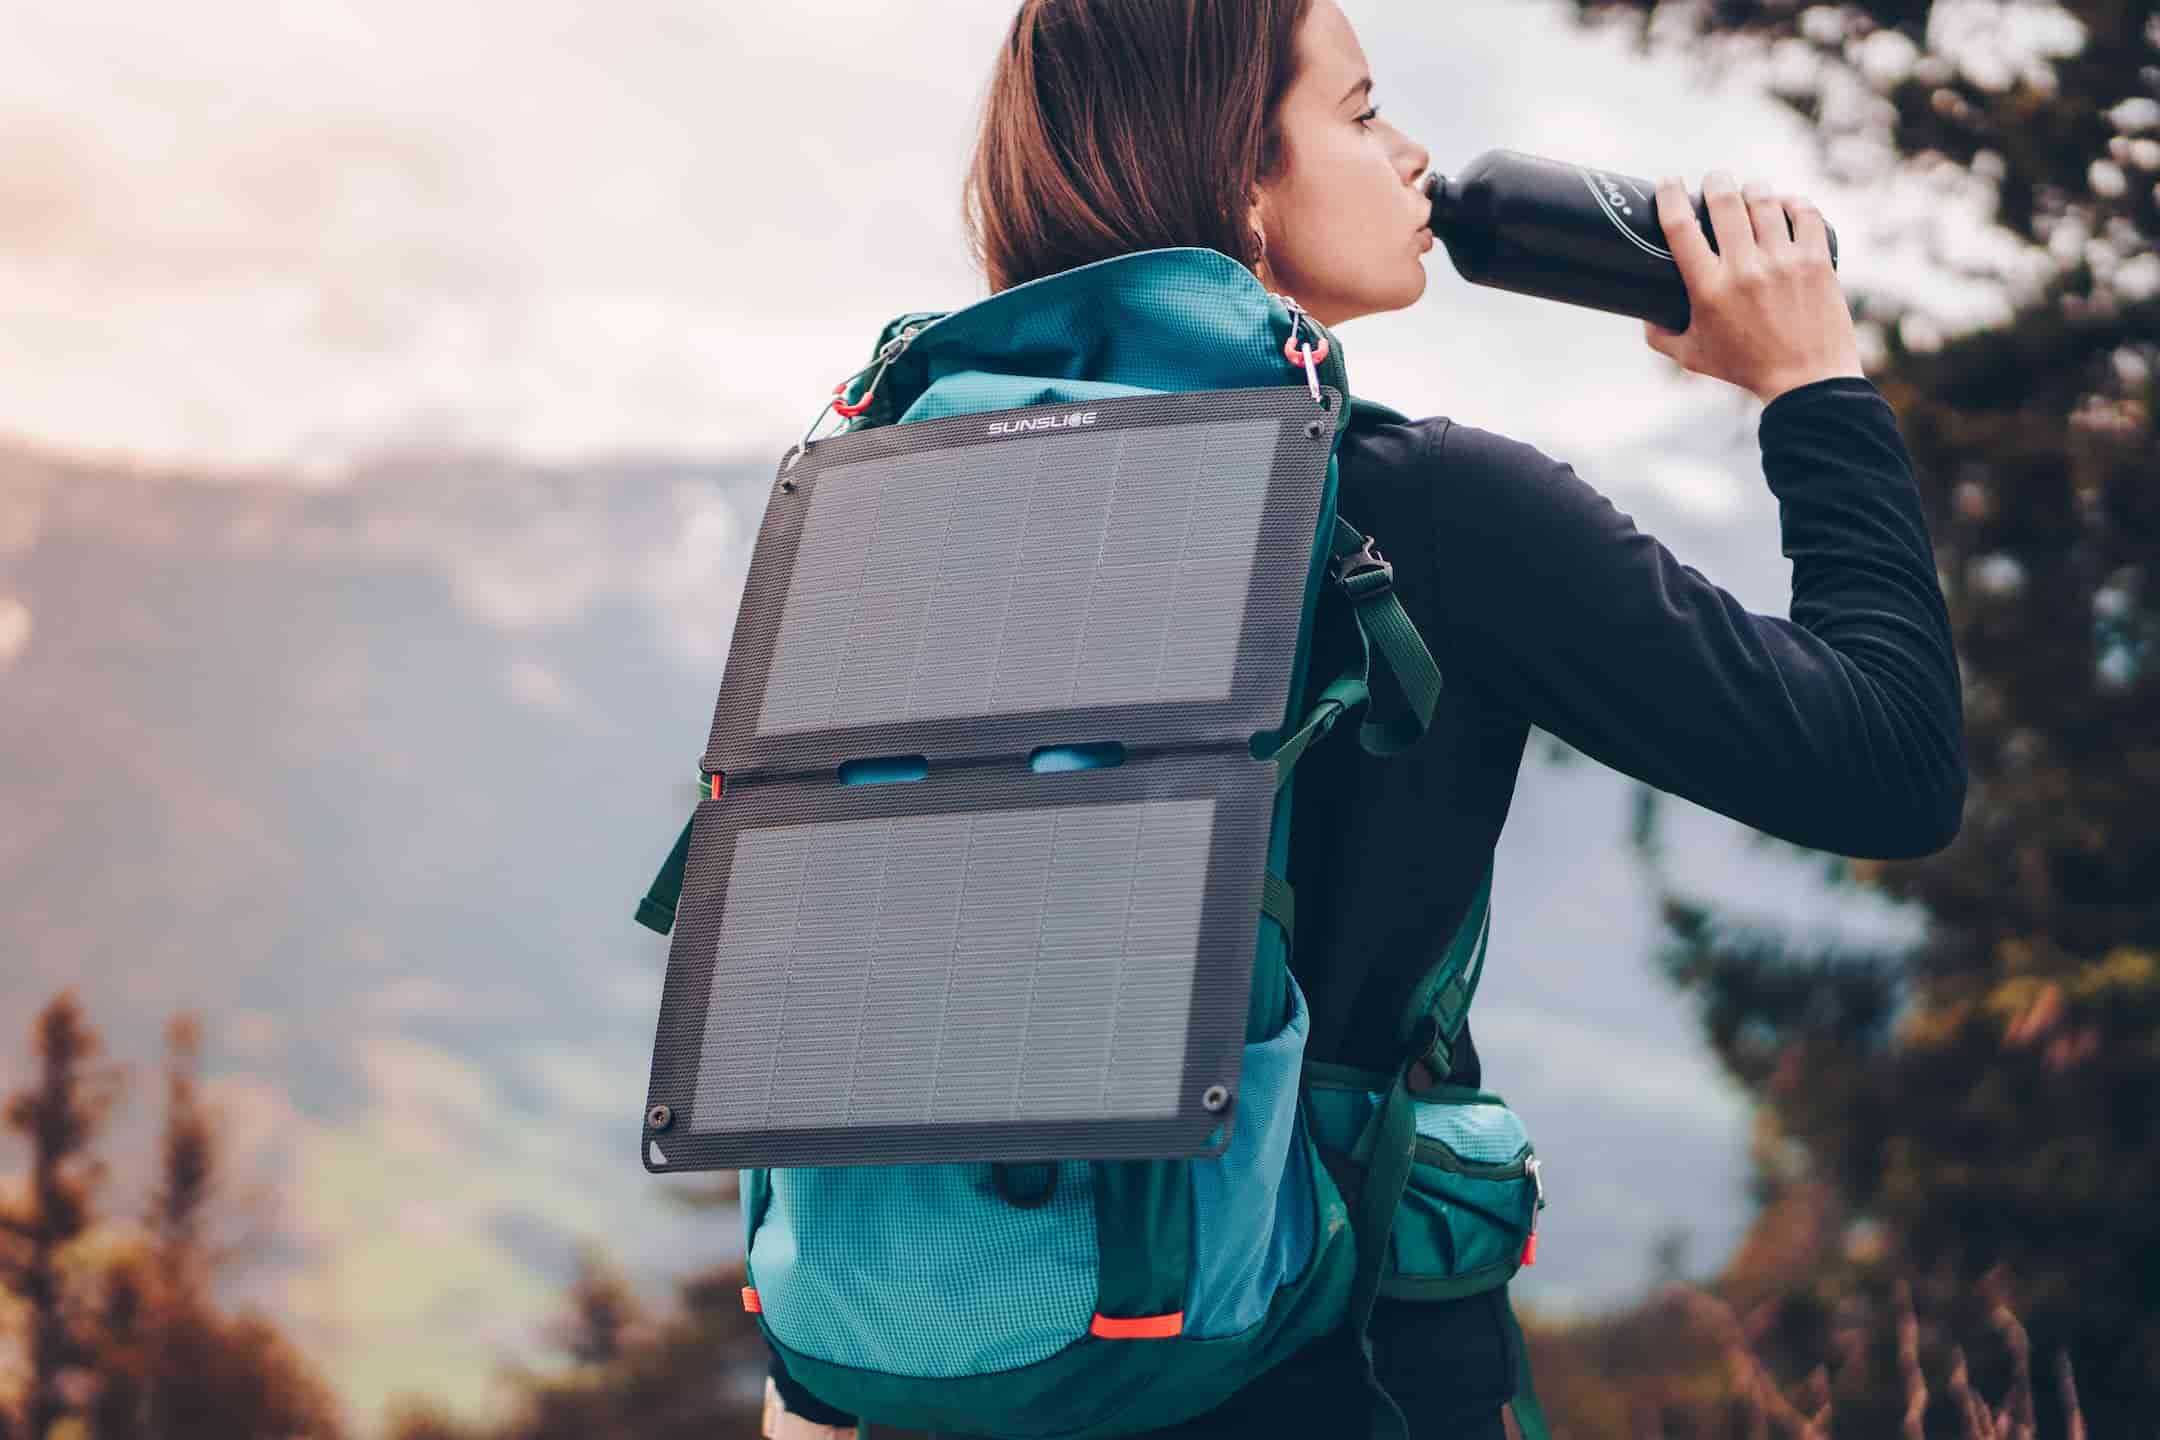 woman drinking water from a gourd and carrying a foldable solar panel on her backpack